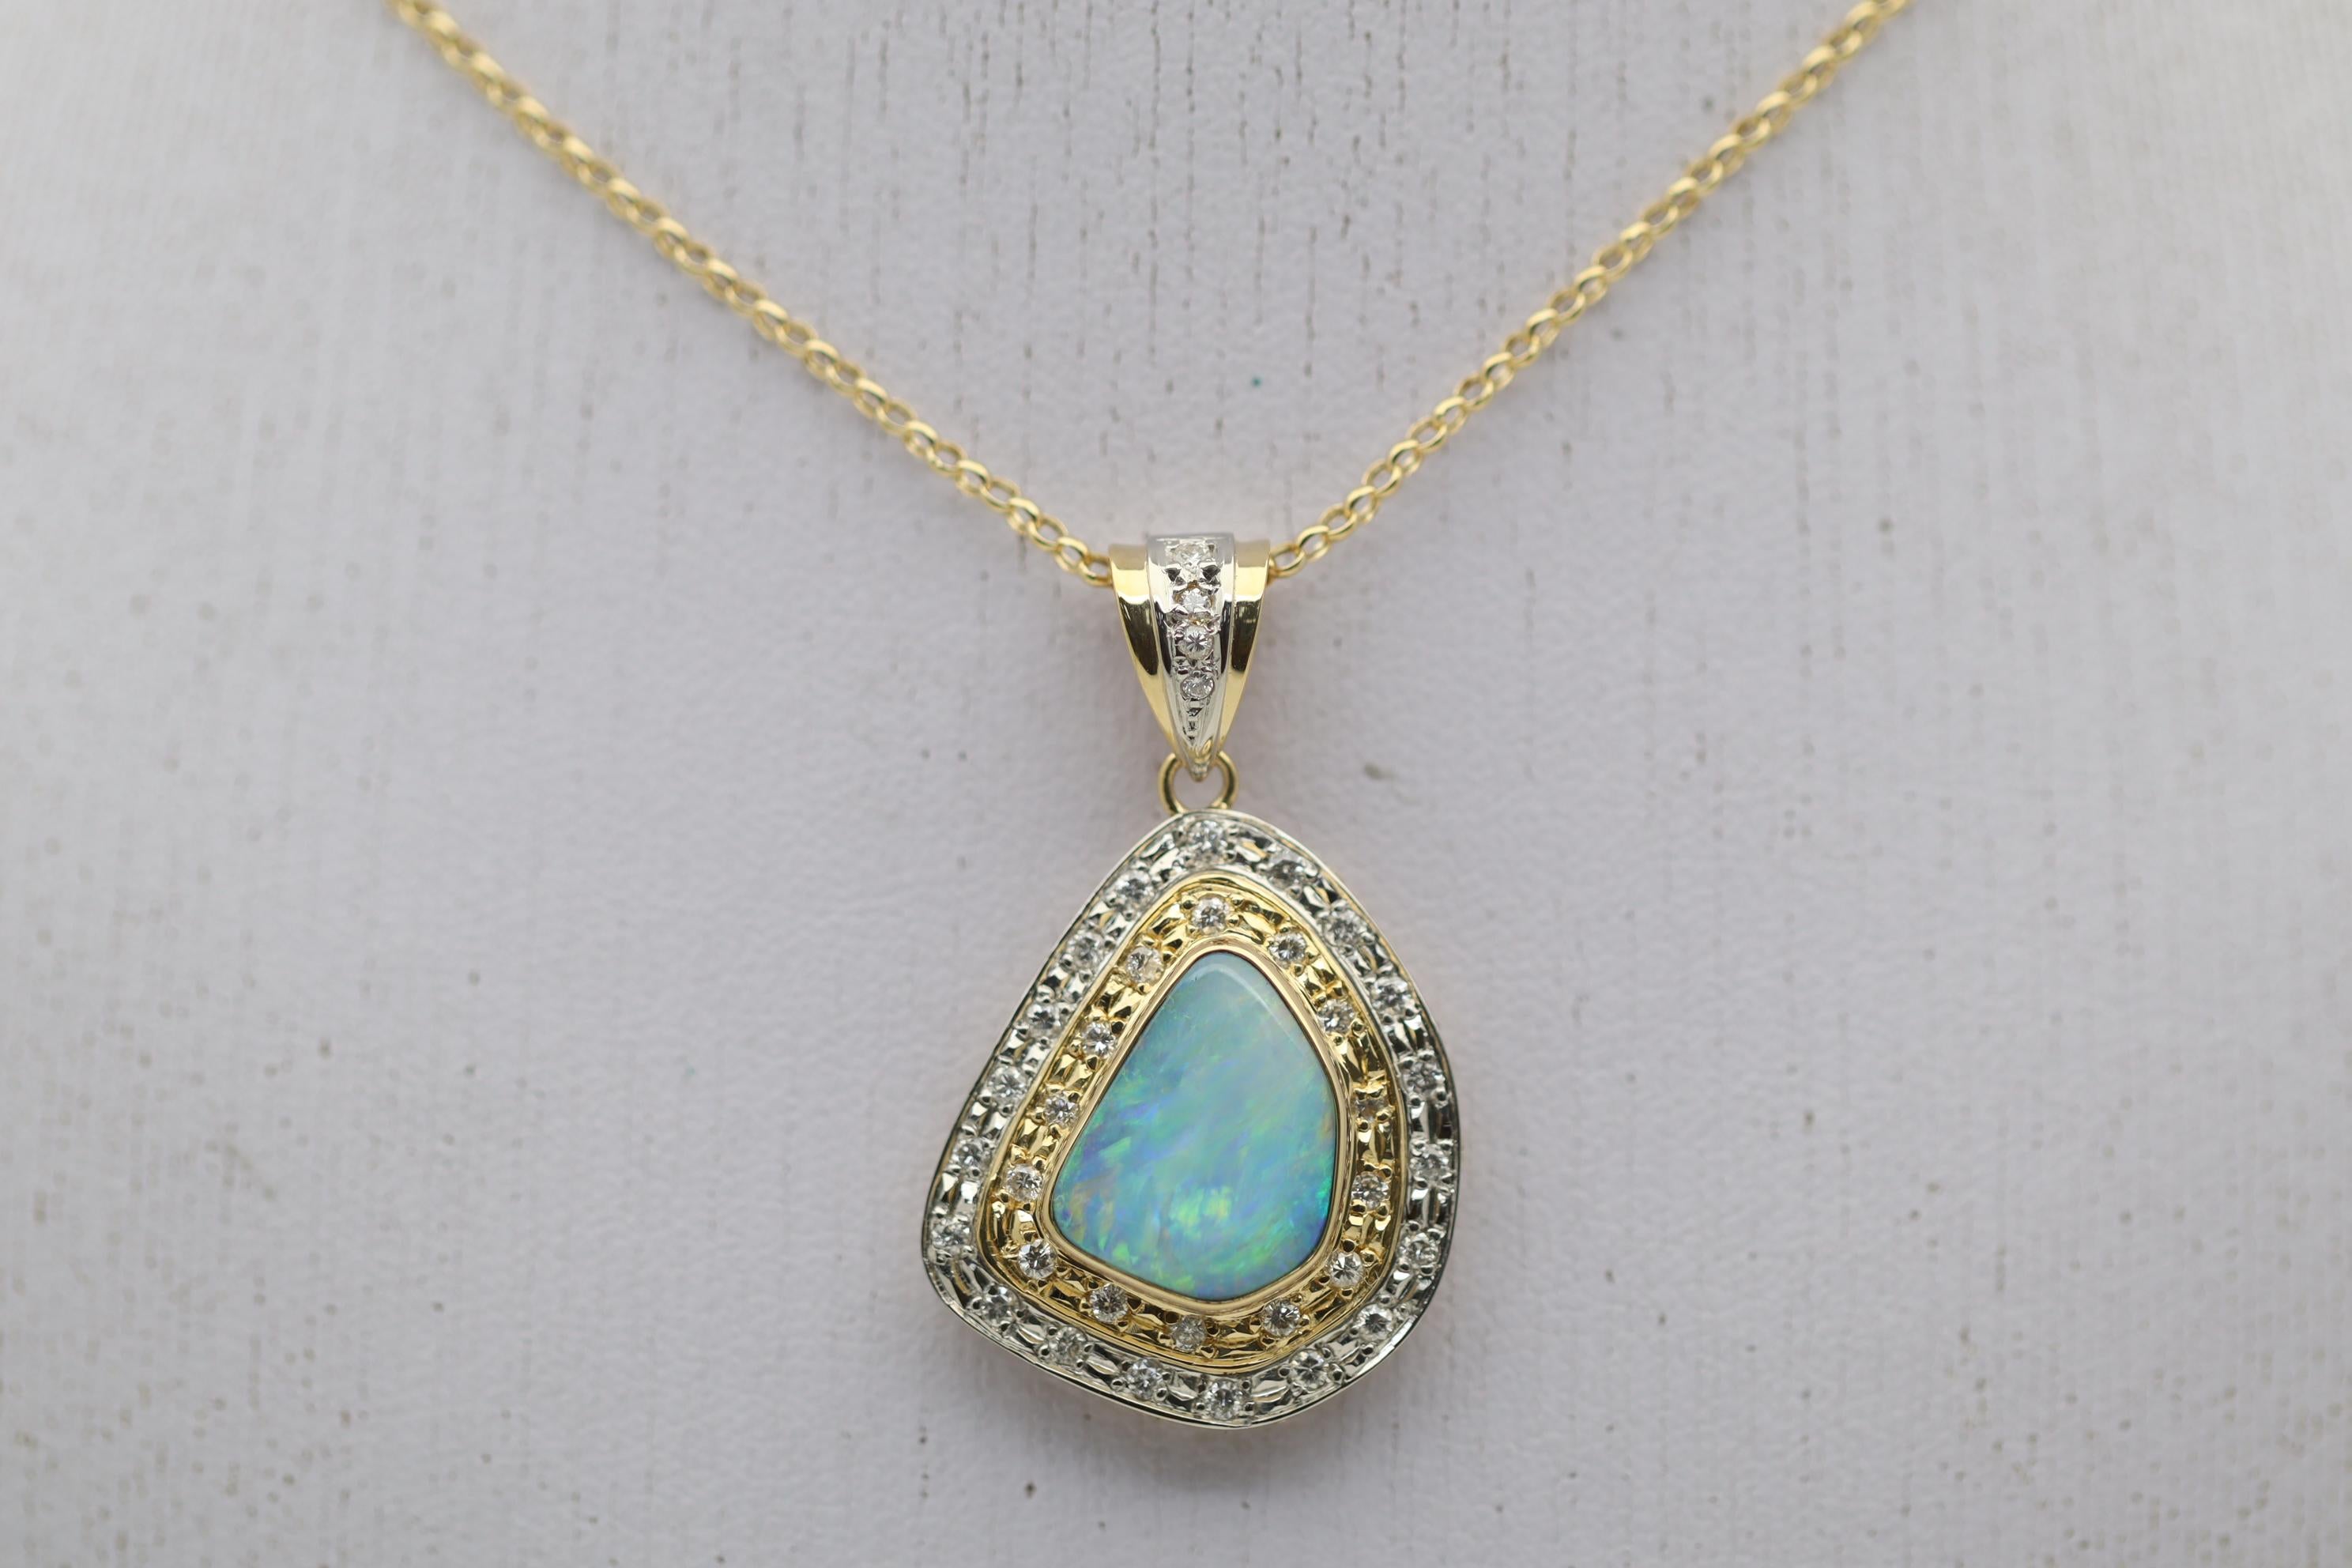 A stylish pendant featuring a natural Australian boulder opal set in a two-tone gold and platinum pendant. The opal weighs 3.10 carats and has green, yellow, blue, and orangy-red play-of-color. It is complemented by 0.59 carats of round